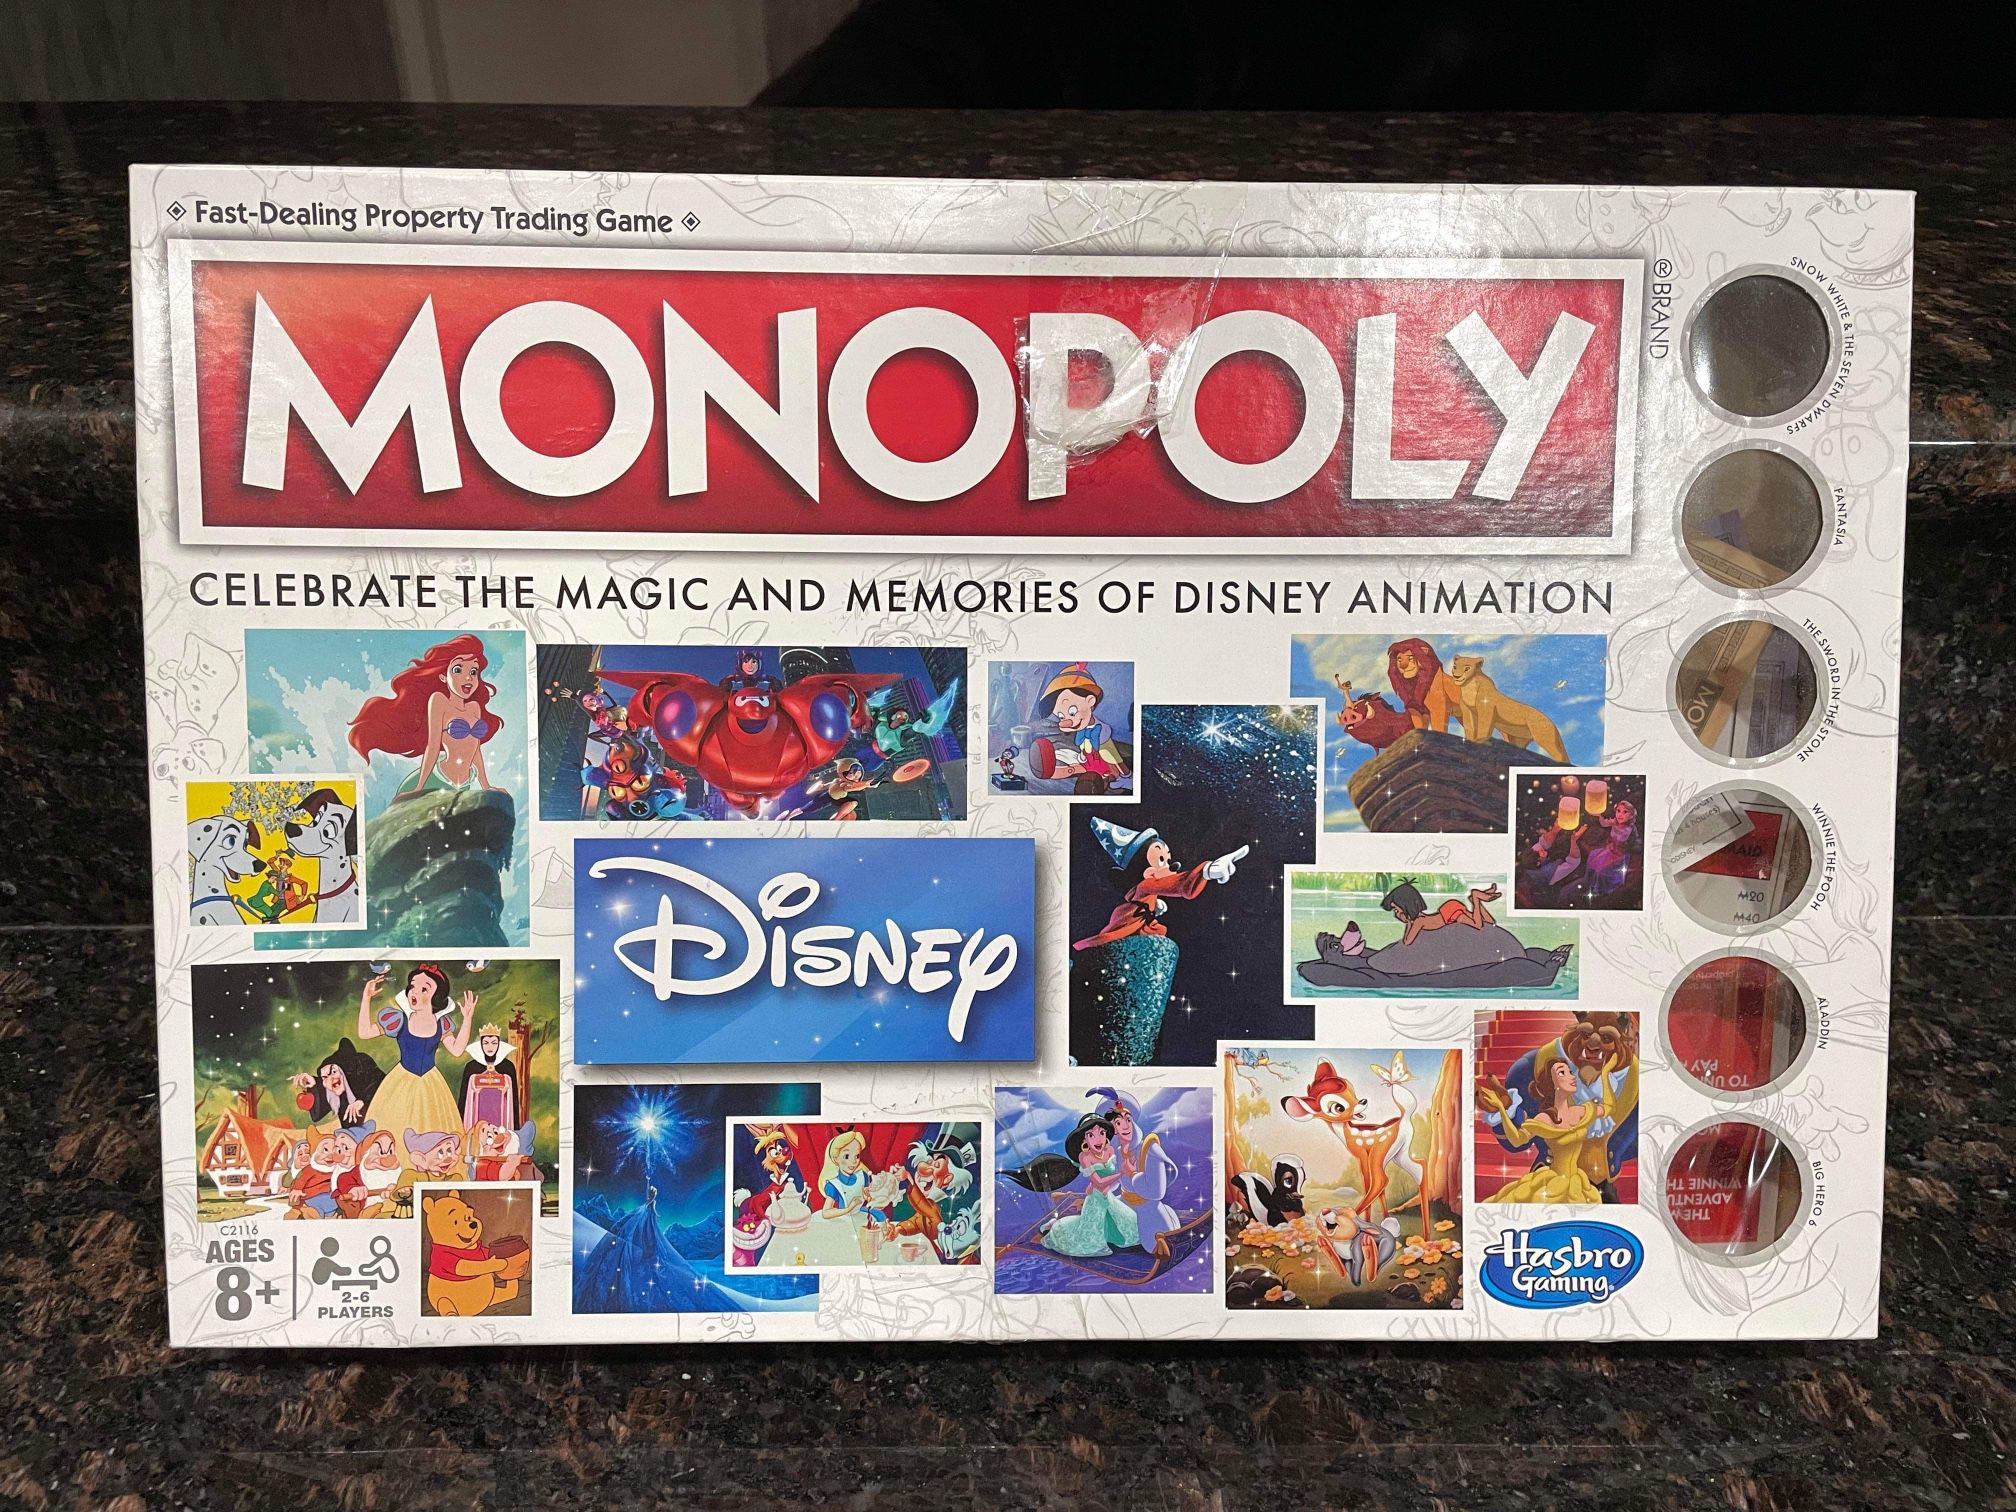 Monopoly Disney Animation Edition Board Game Hasbro Parker Brothers- used complete Coral Springs 33071